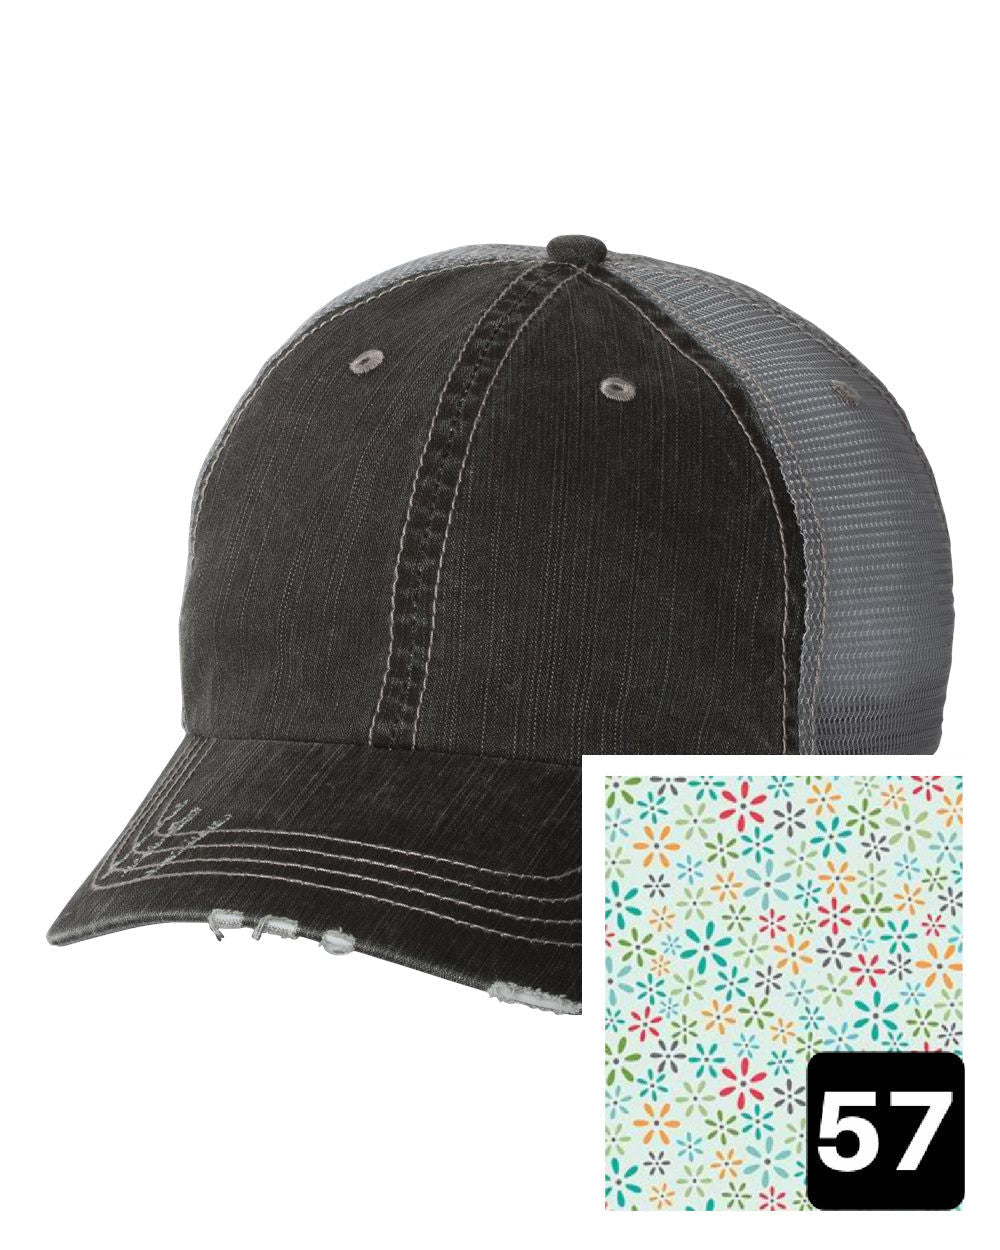 gray distressed trucker hat with white daisy on yellow fabric state of Arkansas